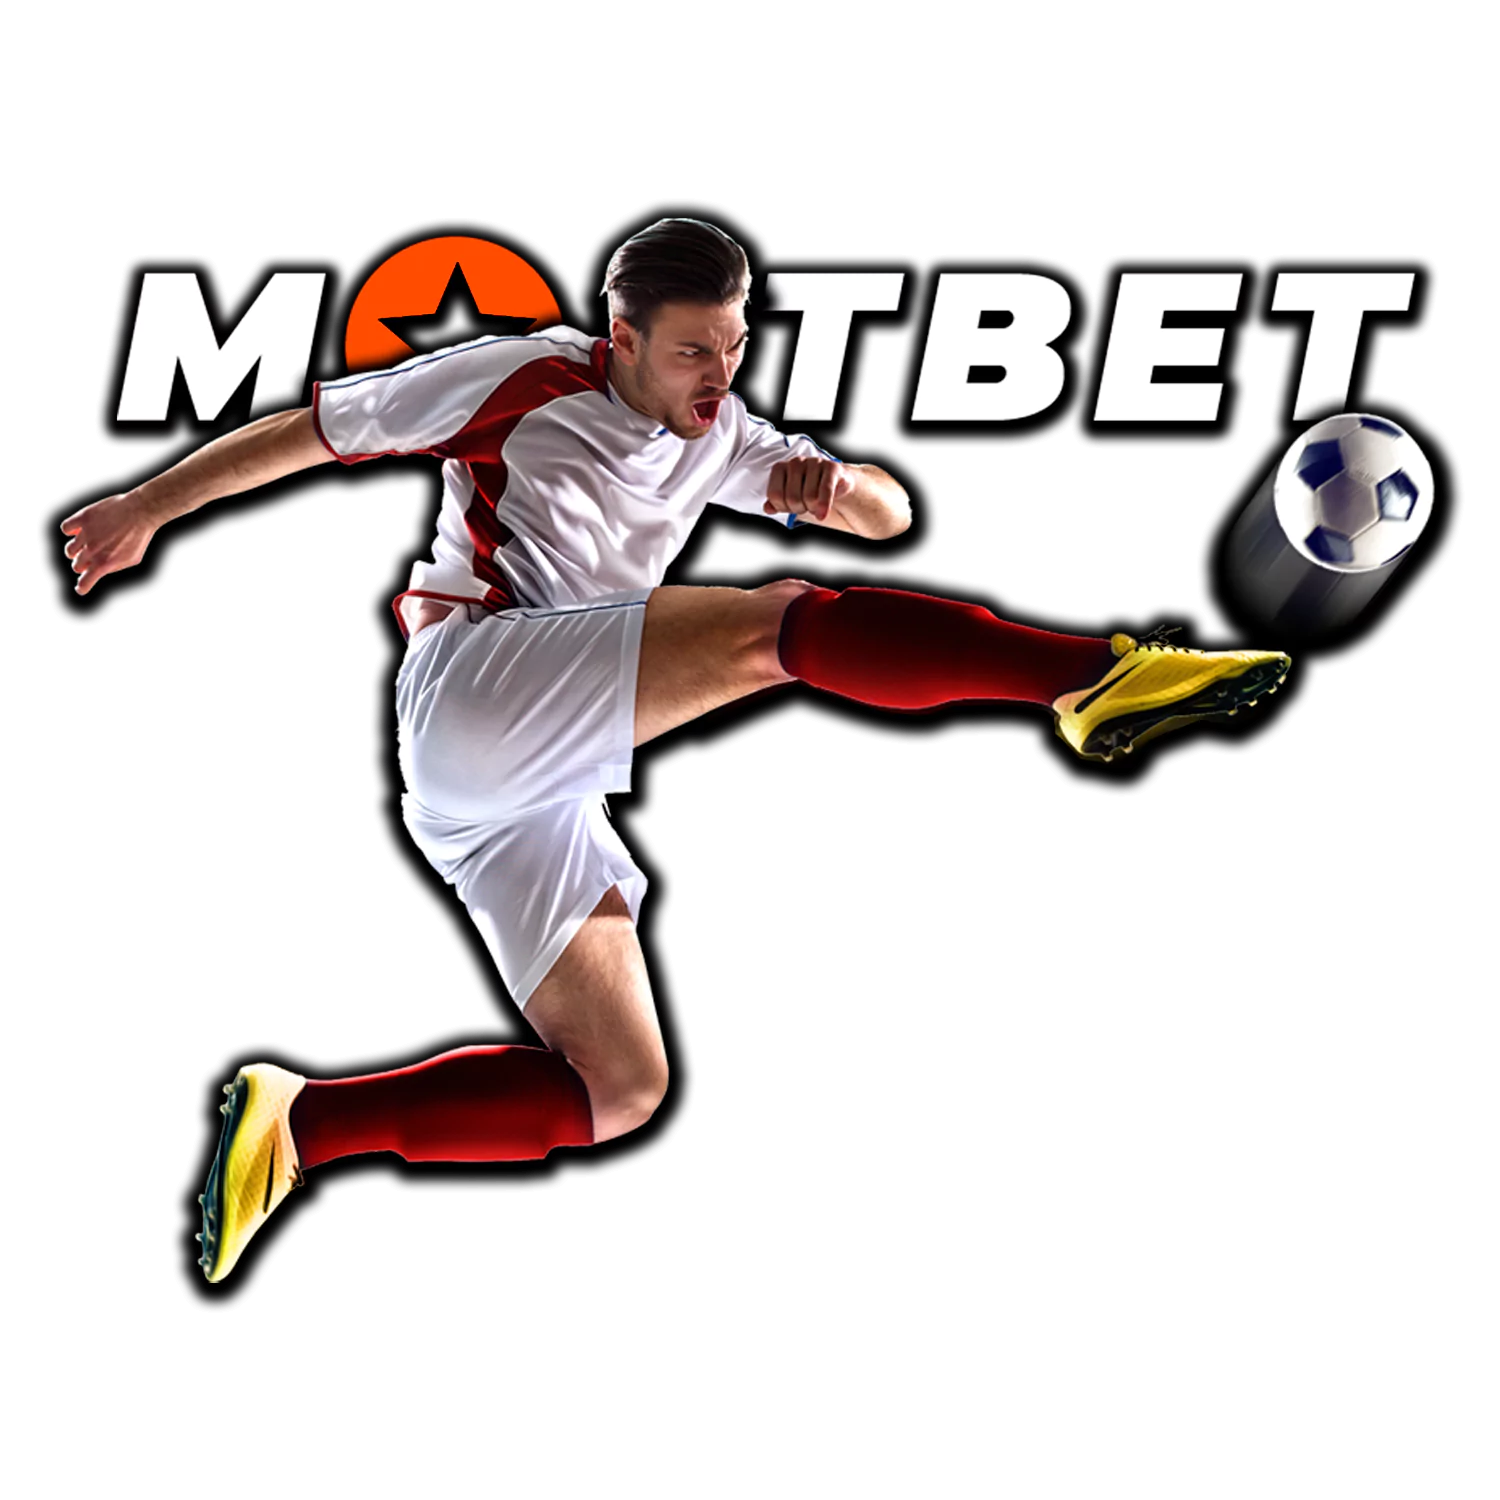 Find out about all the advantages of football betting at Mostbet.